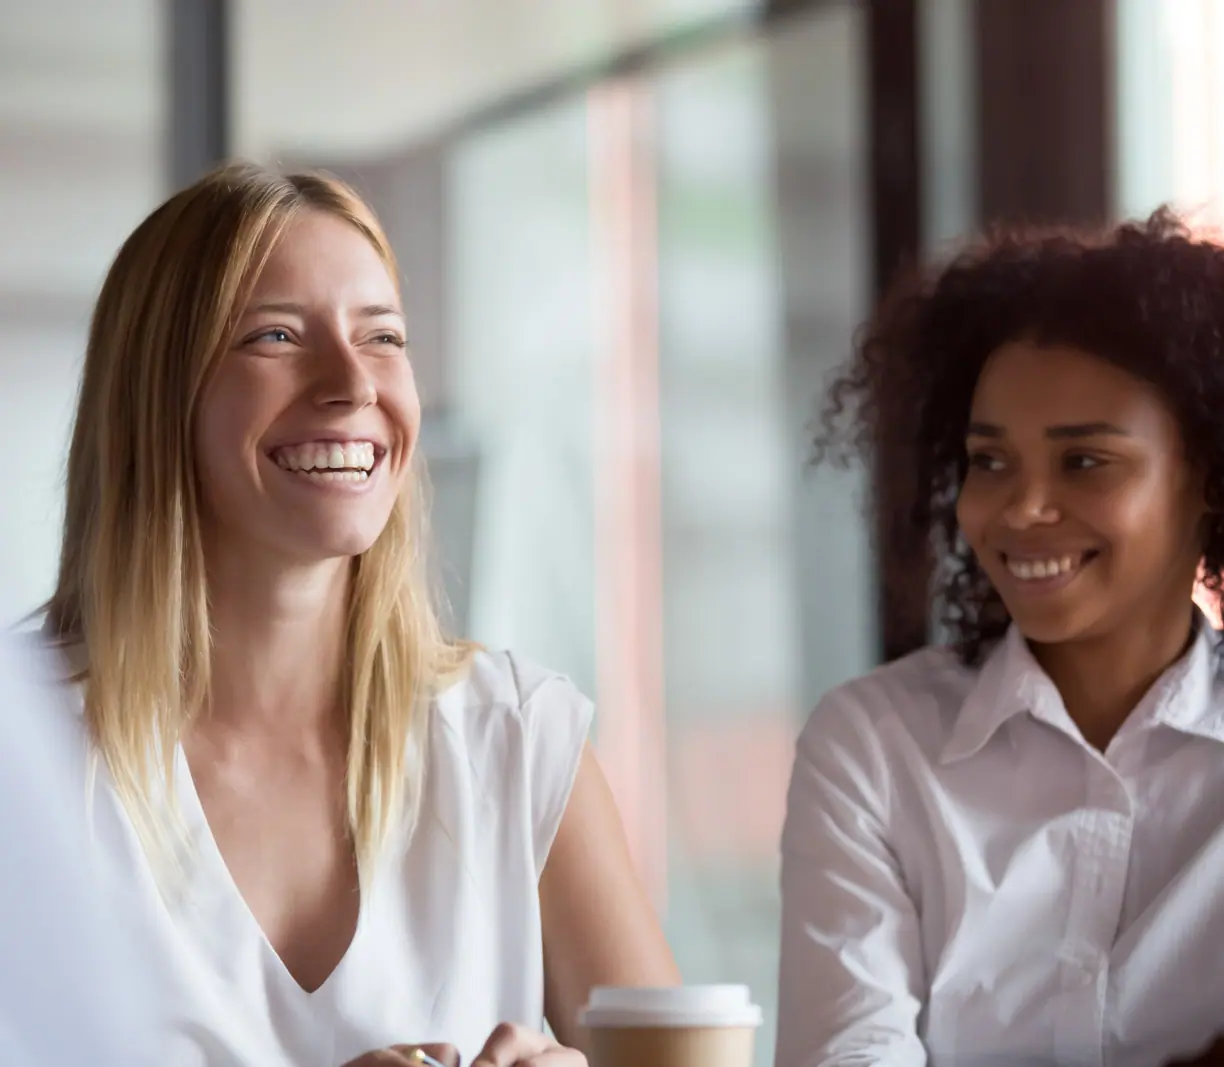 Three Ways to Recognize and Support Women in the Workforce